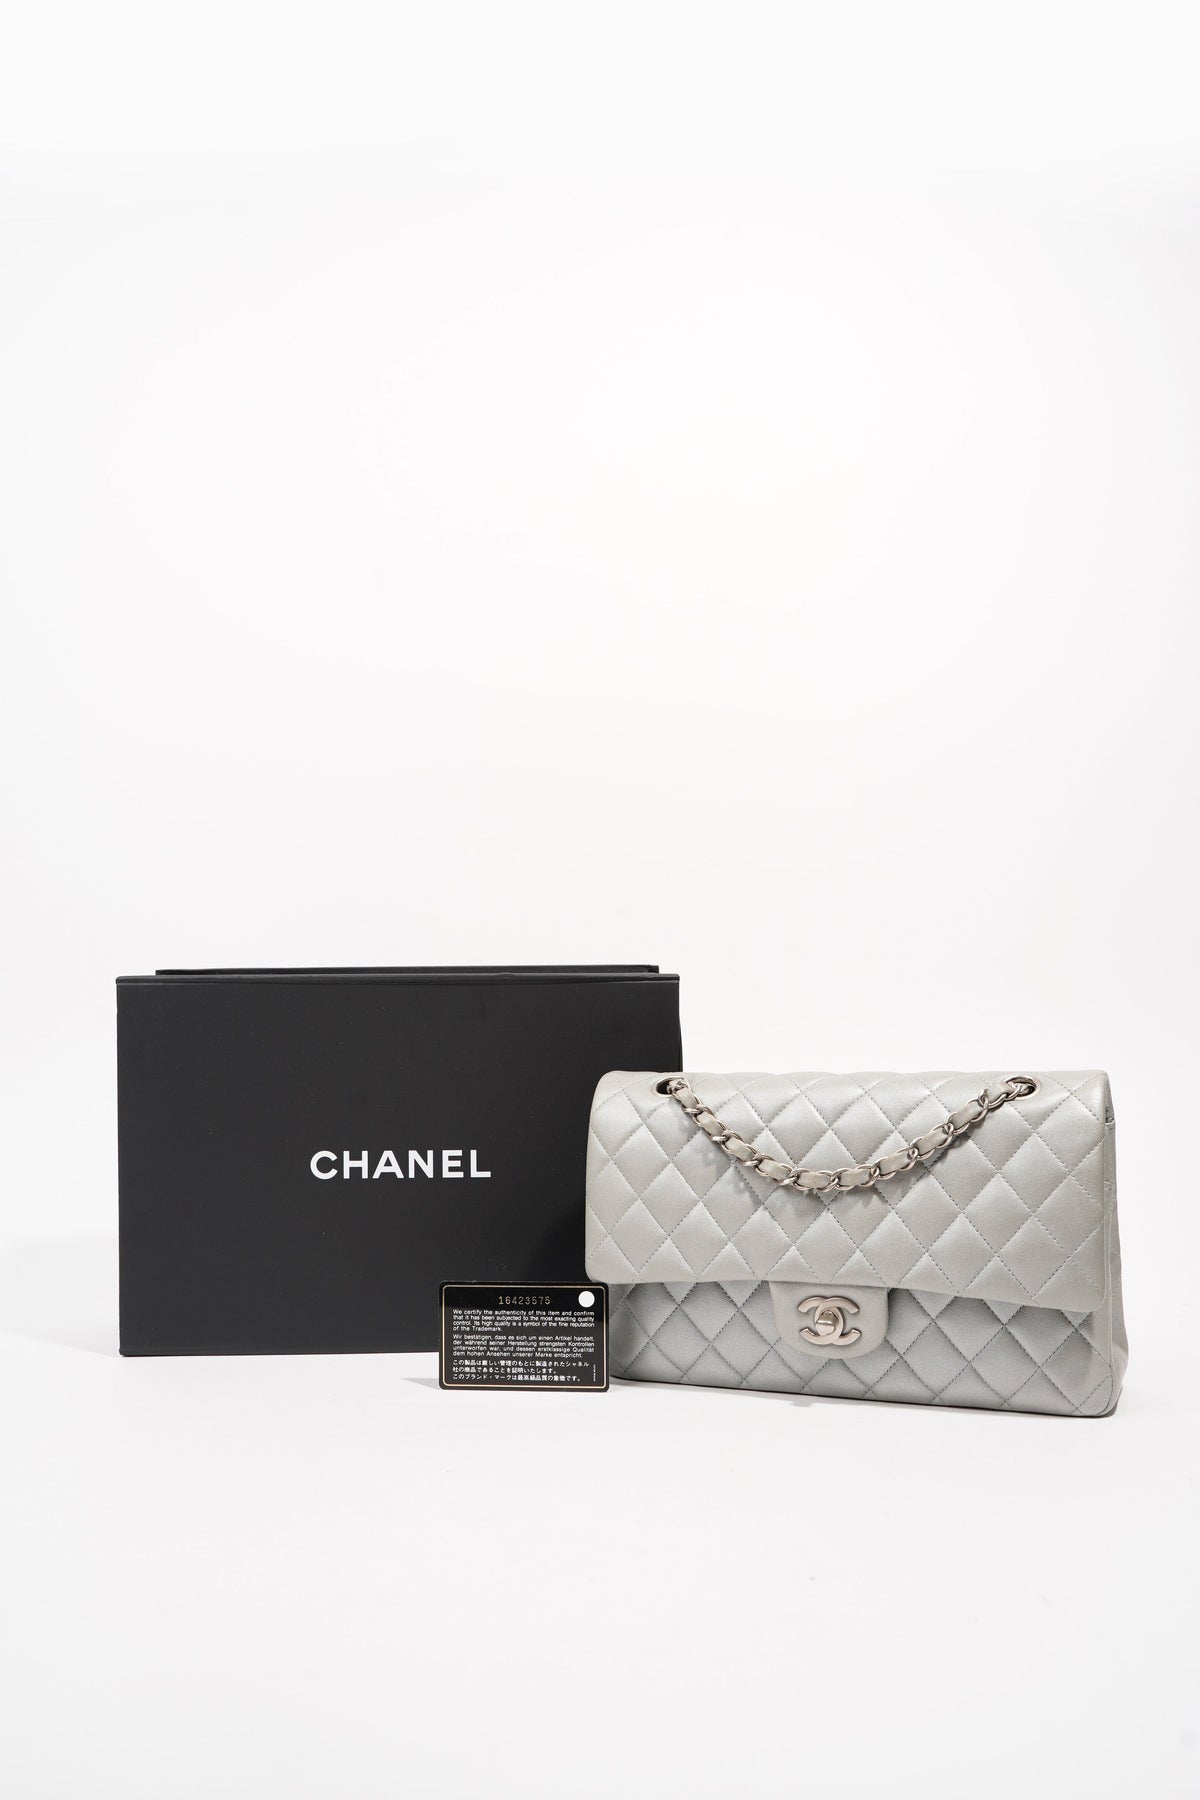 Chanel Classic Flap Grey - 60 For Sale on 1stDibs  chanel grey flap bag, grey  chanel classic flap, chanel classic grey